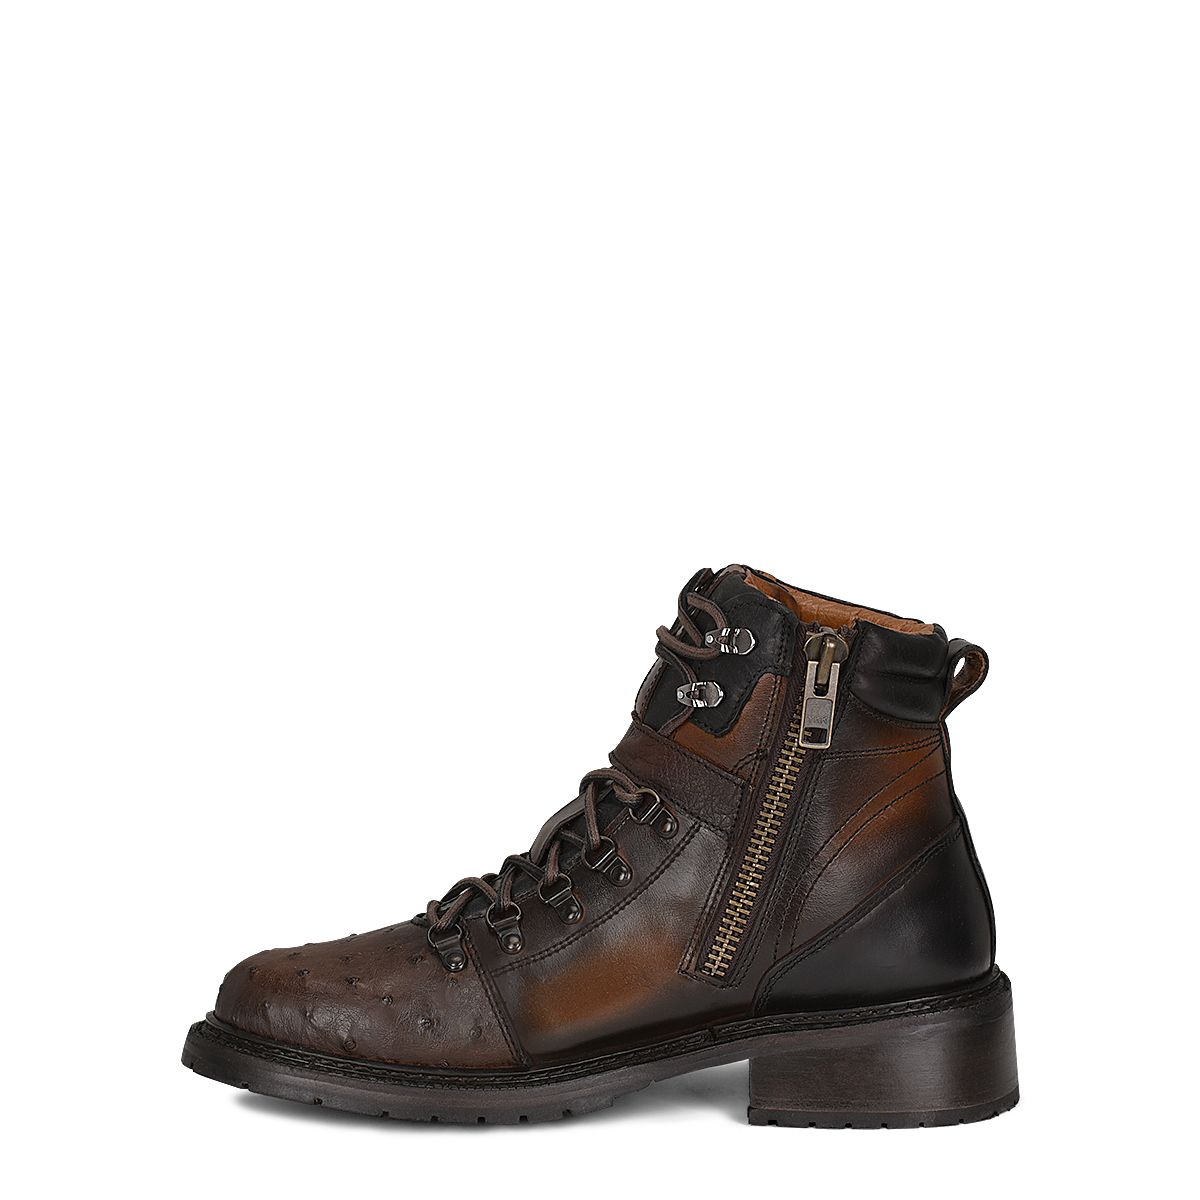 4J08A3 - Cuadra tobacco casual vintage fashion ostrich ankle booties for men-CUADRA-Kuet-Cuadra-Boots